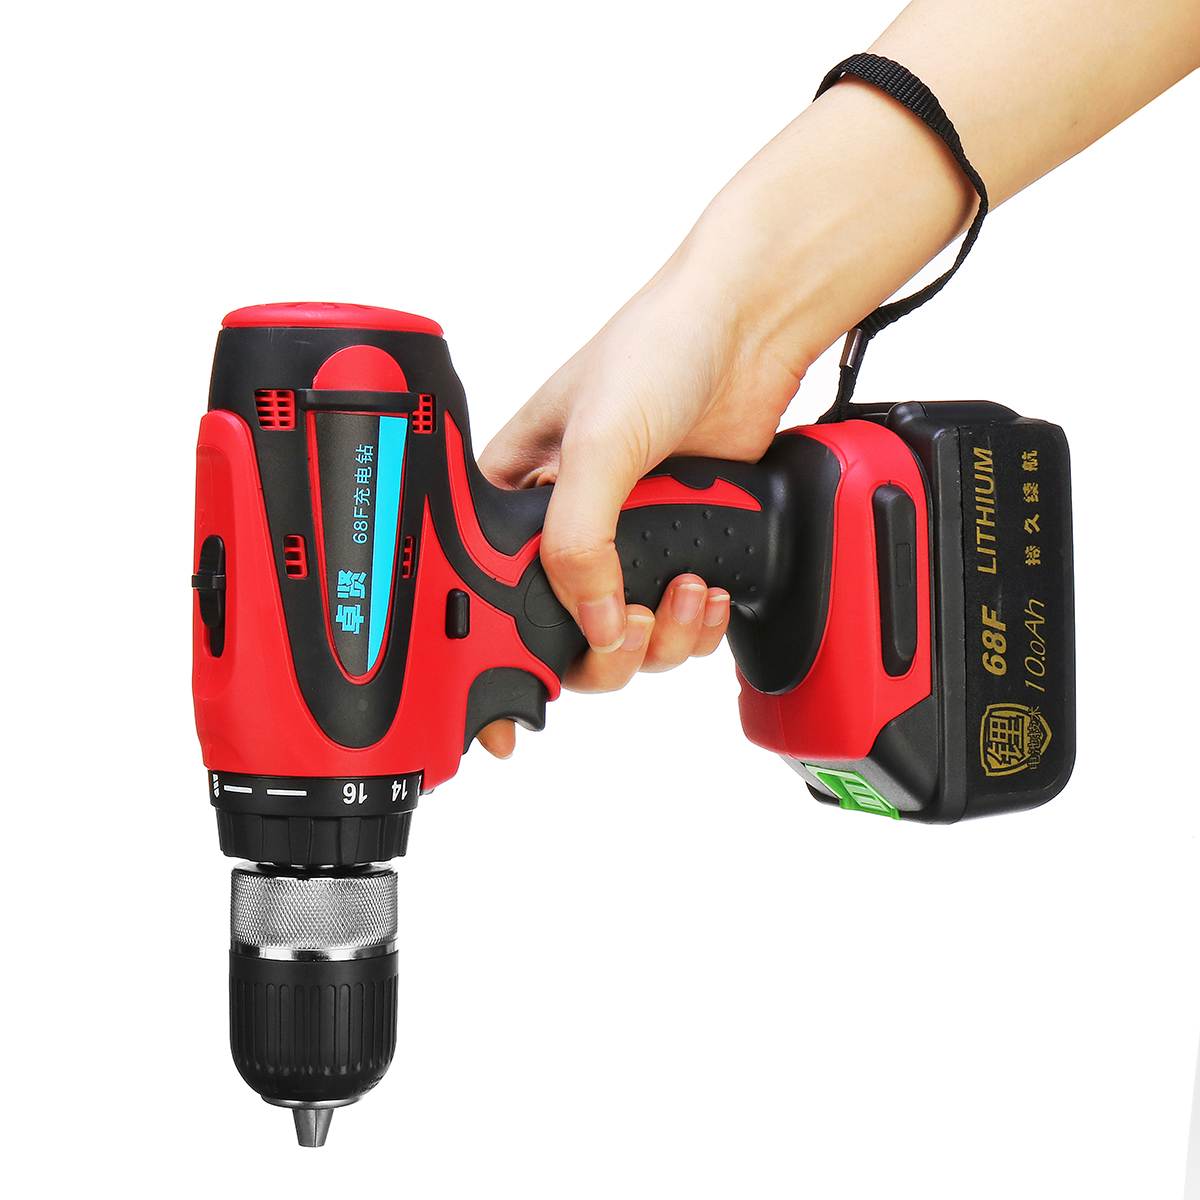 68V-10Ah-Cordless-Rechargeable-Electric-Drill-2-Speed-Heavy-Duty-Torque-Power-Drills-1403940-8